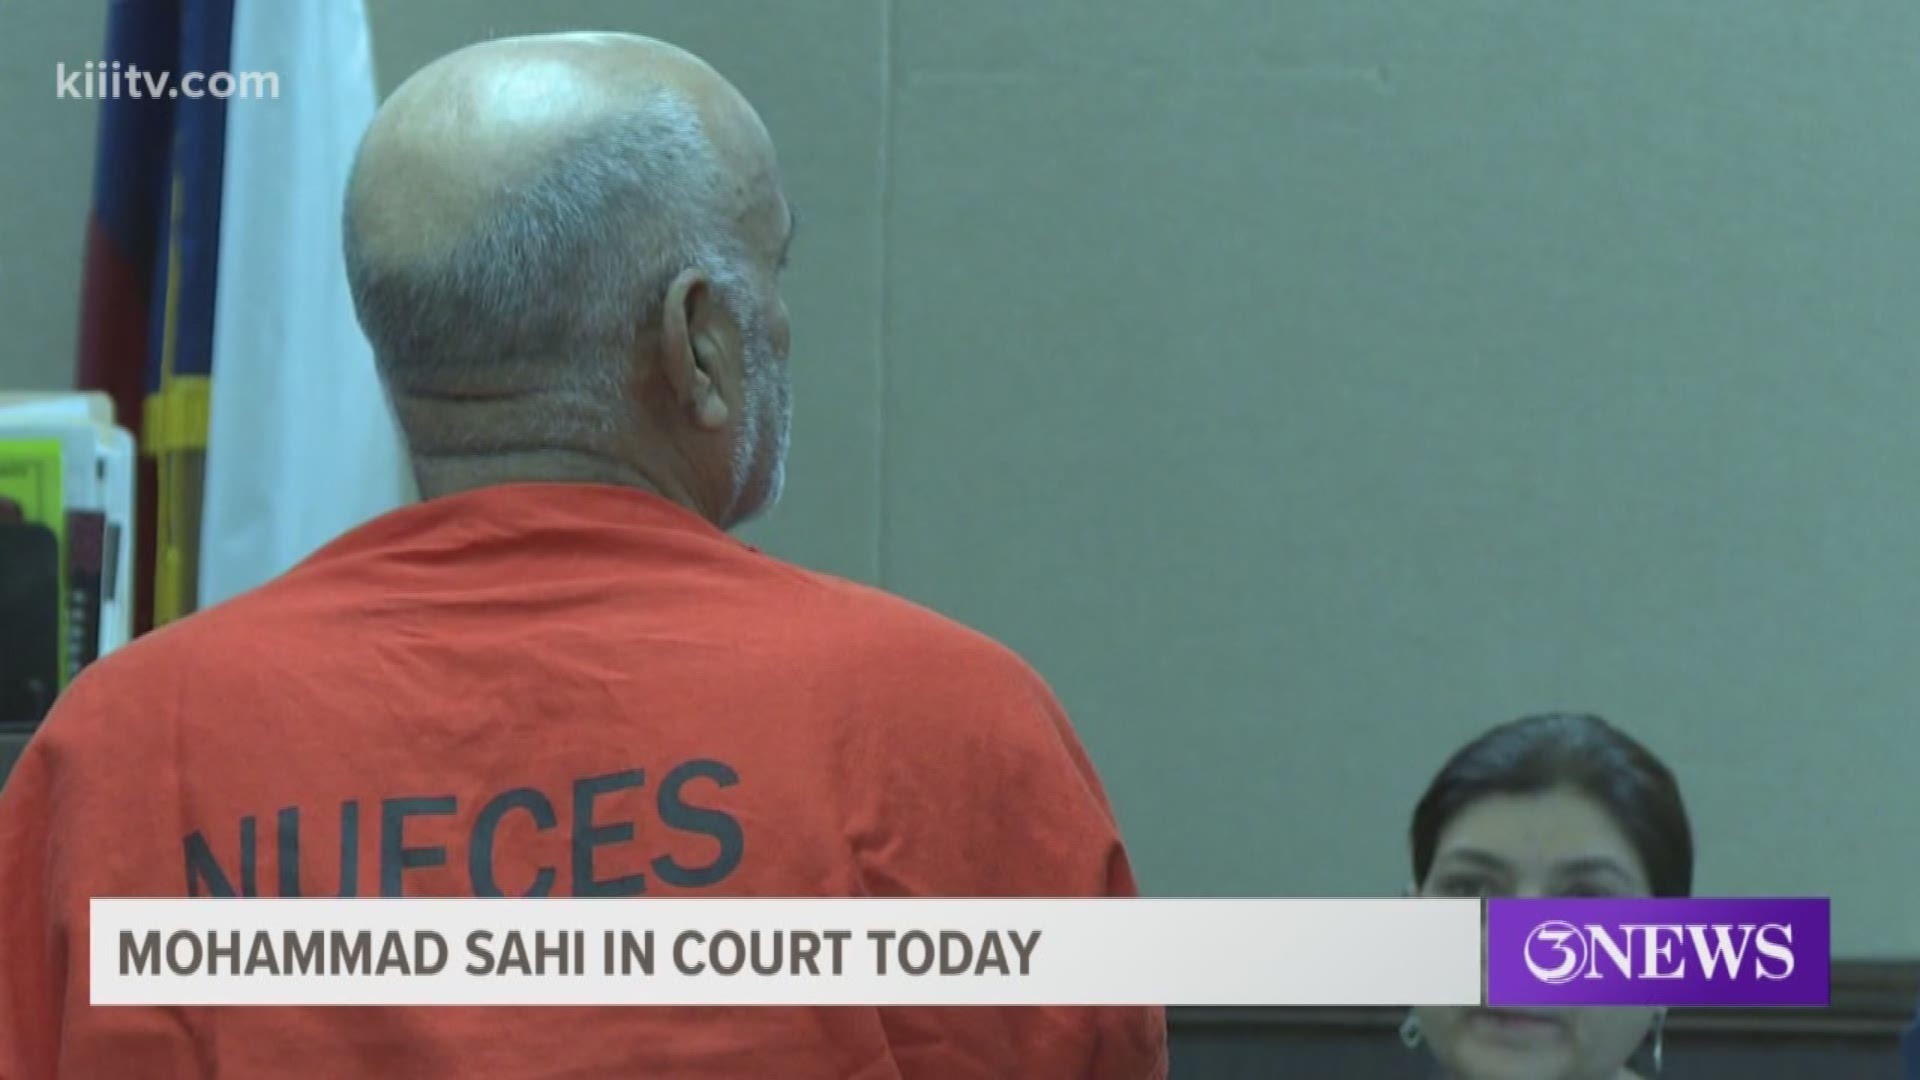 With the help of an interpreter Monday, an elderly man accused of brutally beating his daughter and grandson to death and severely injuring another grandson made his first appearance in court.